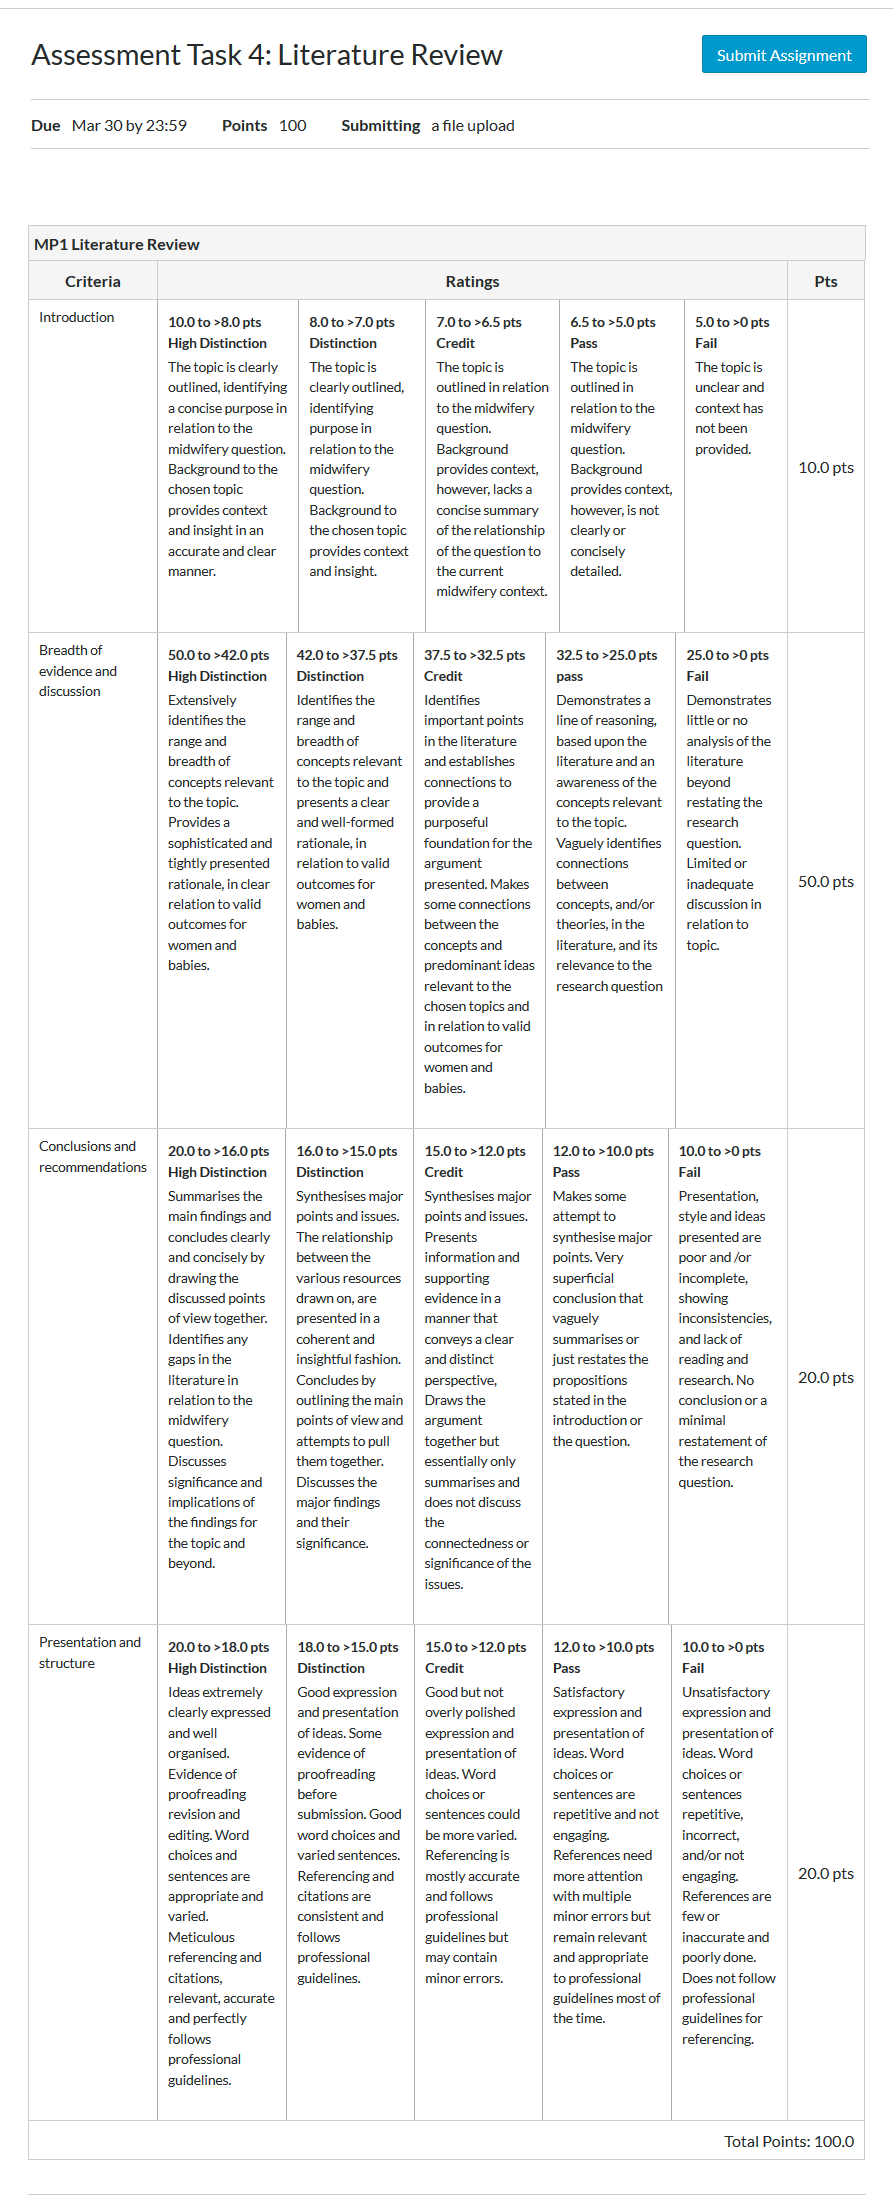 An assessment rubric displaying a table of marking criteria and the possible points available for each criteria.